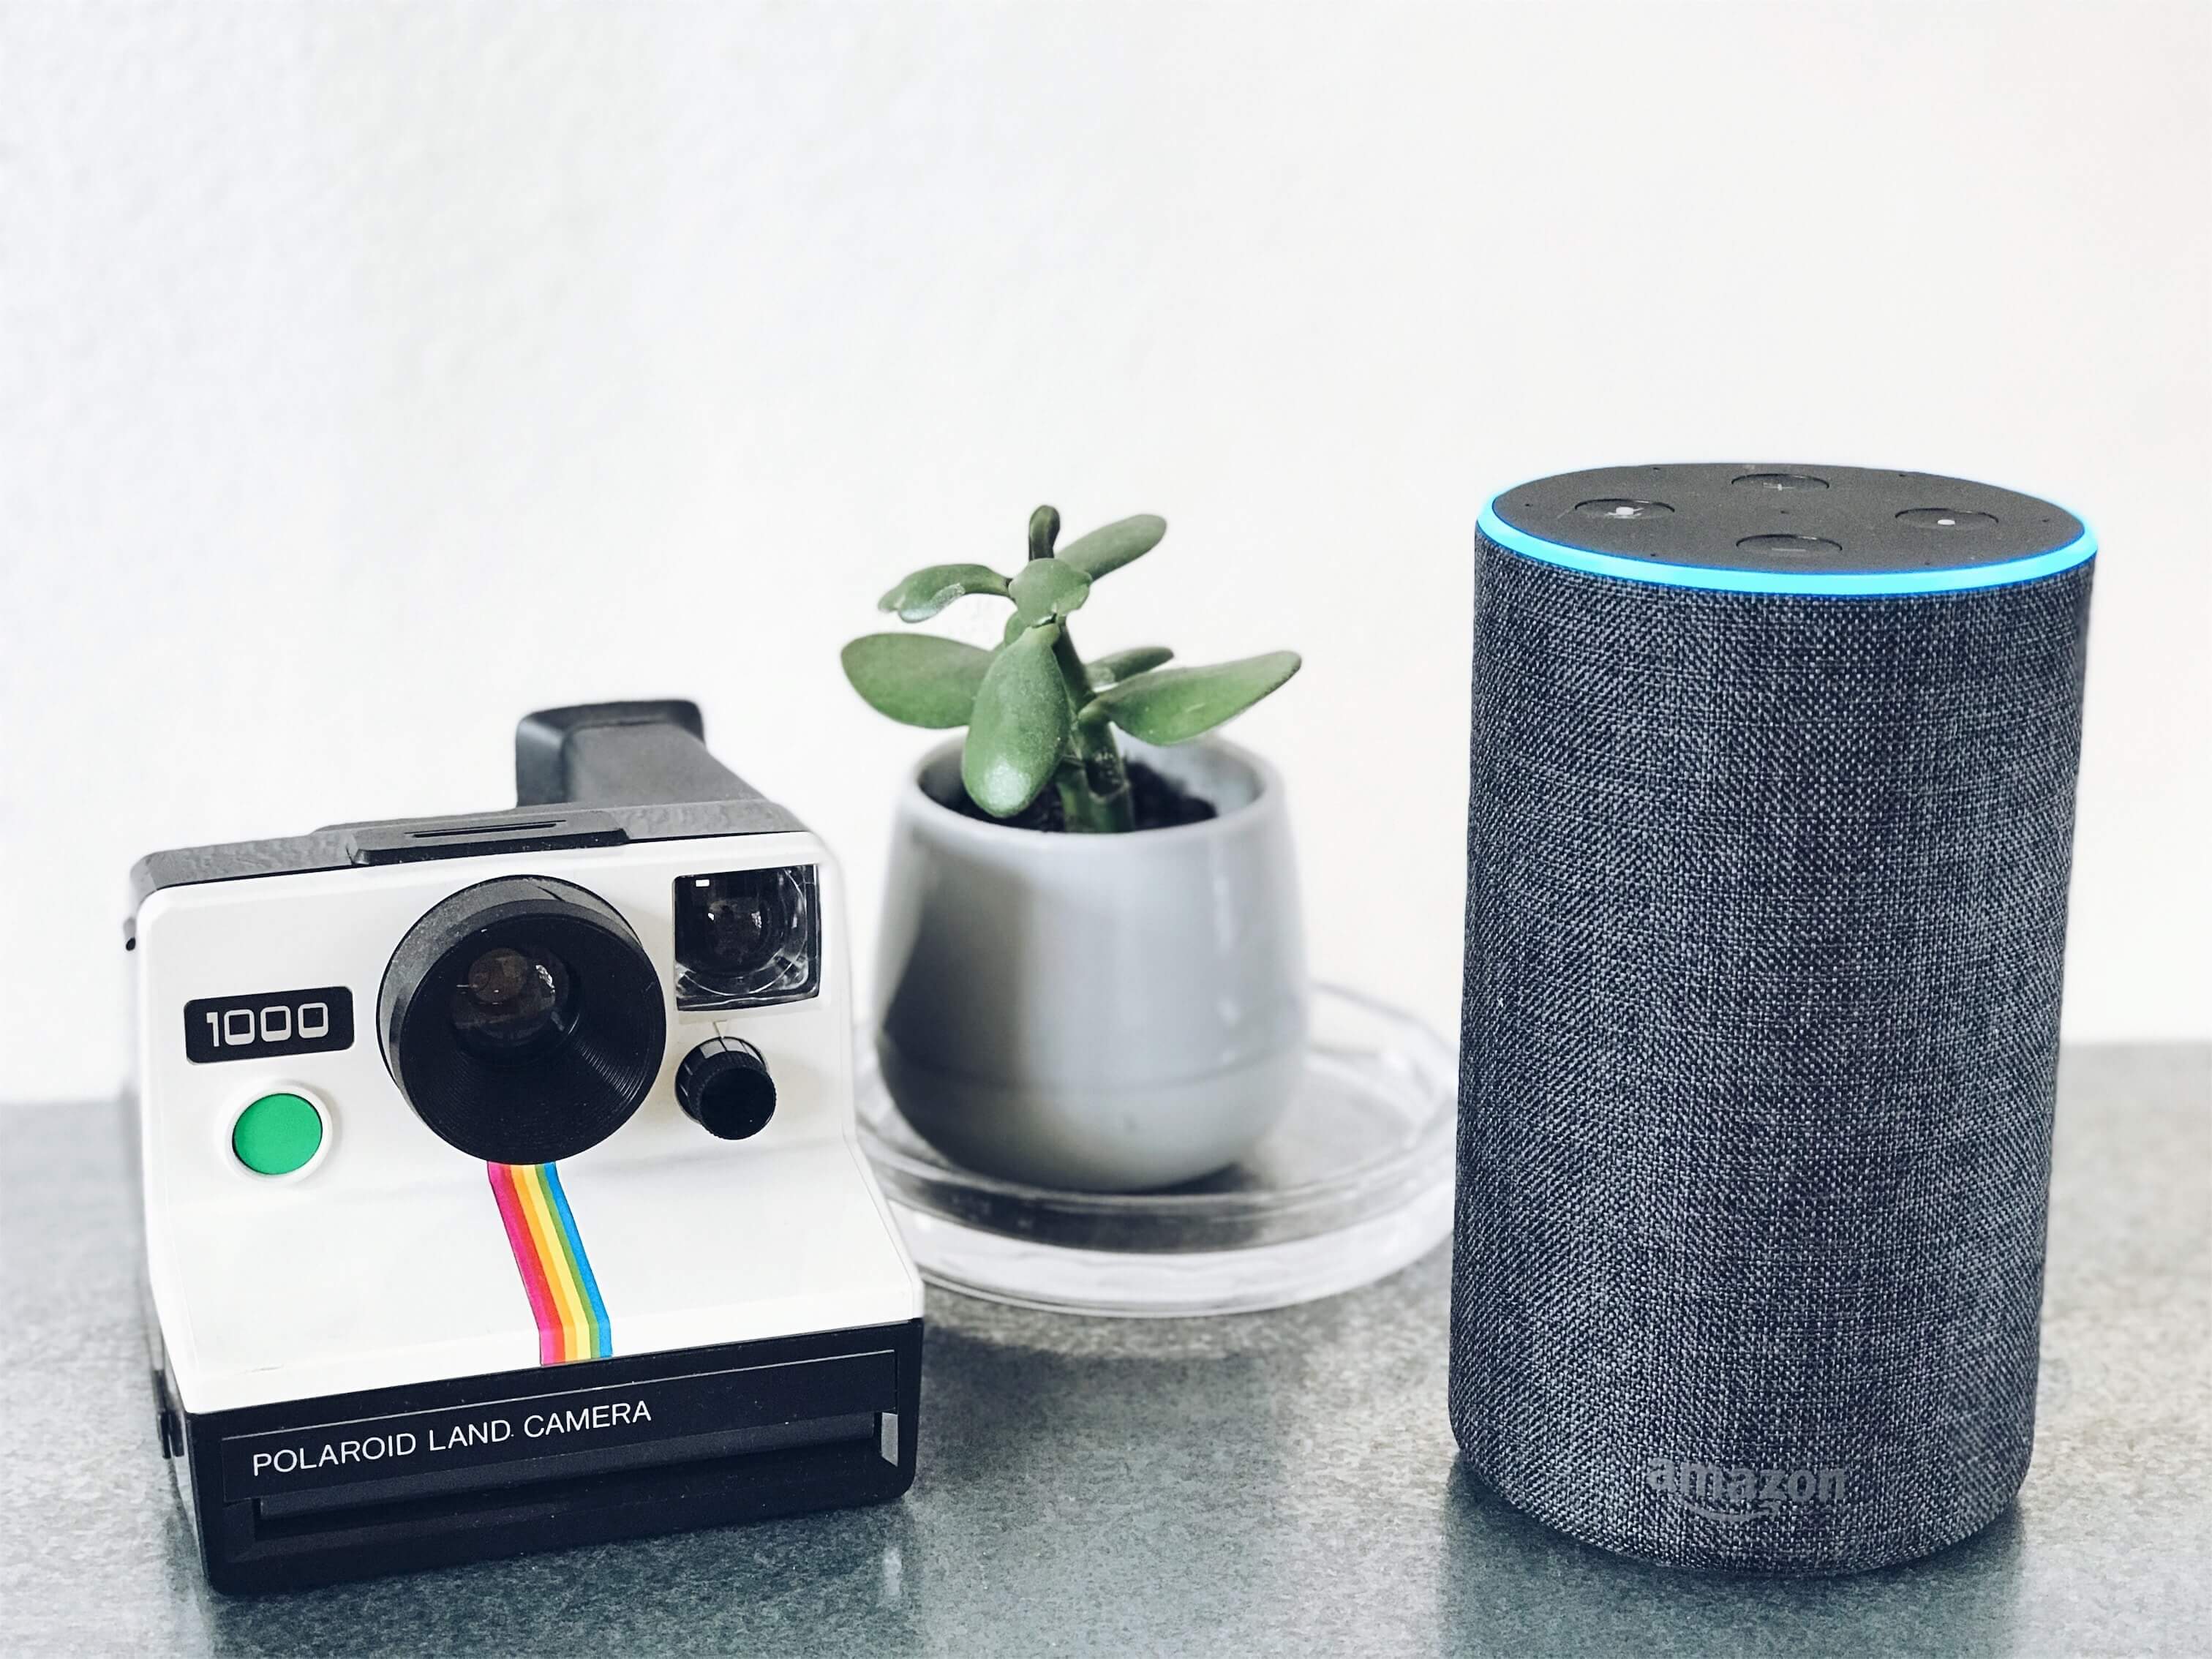 Amazon Echo powered by Alexa, a plant pot, and a polaroid land camera placed close to each other